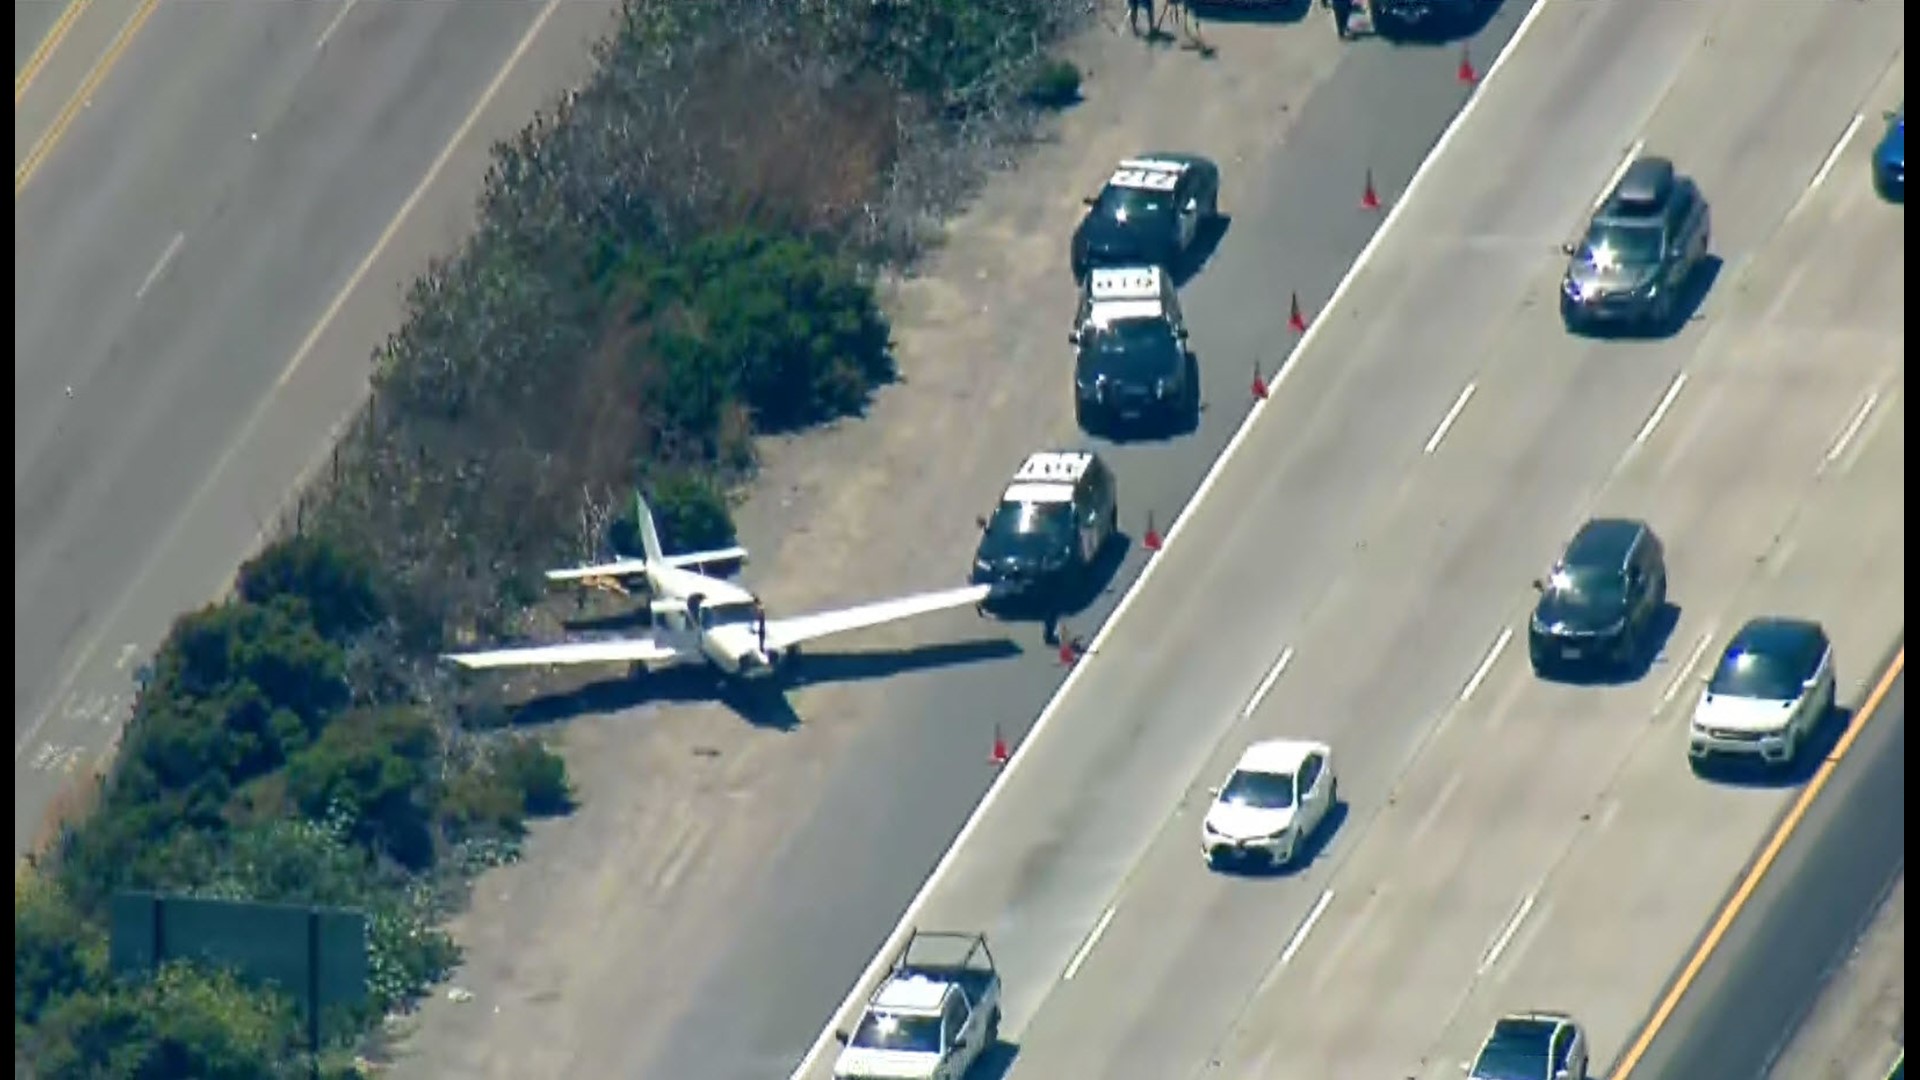 The 55-year-old pilot was uninjured after landing the plane on the freeway near Basilone Rd. near north of San Onofre.